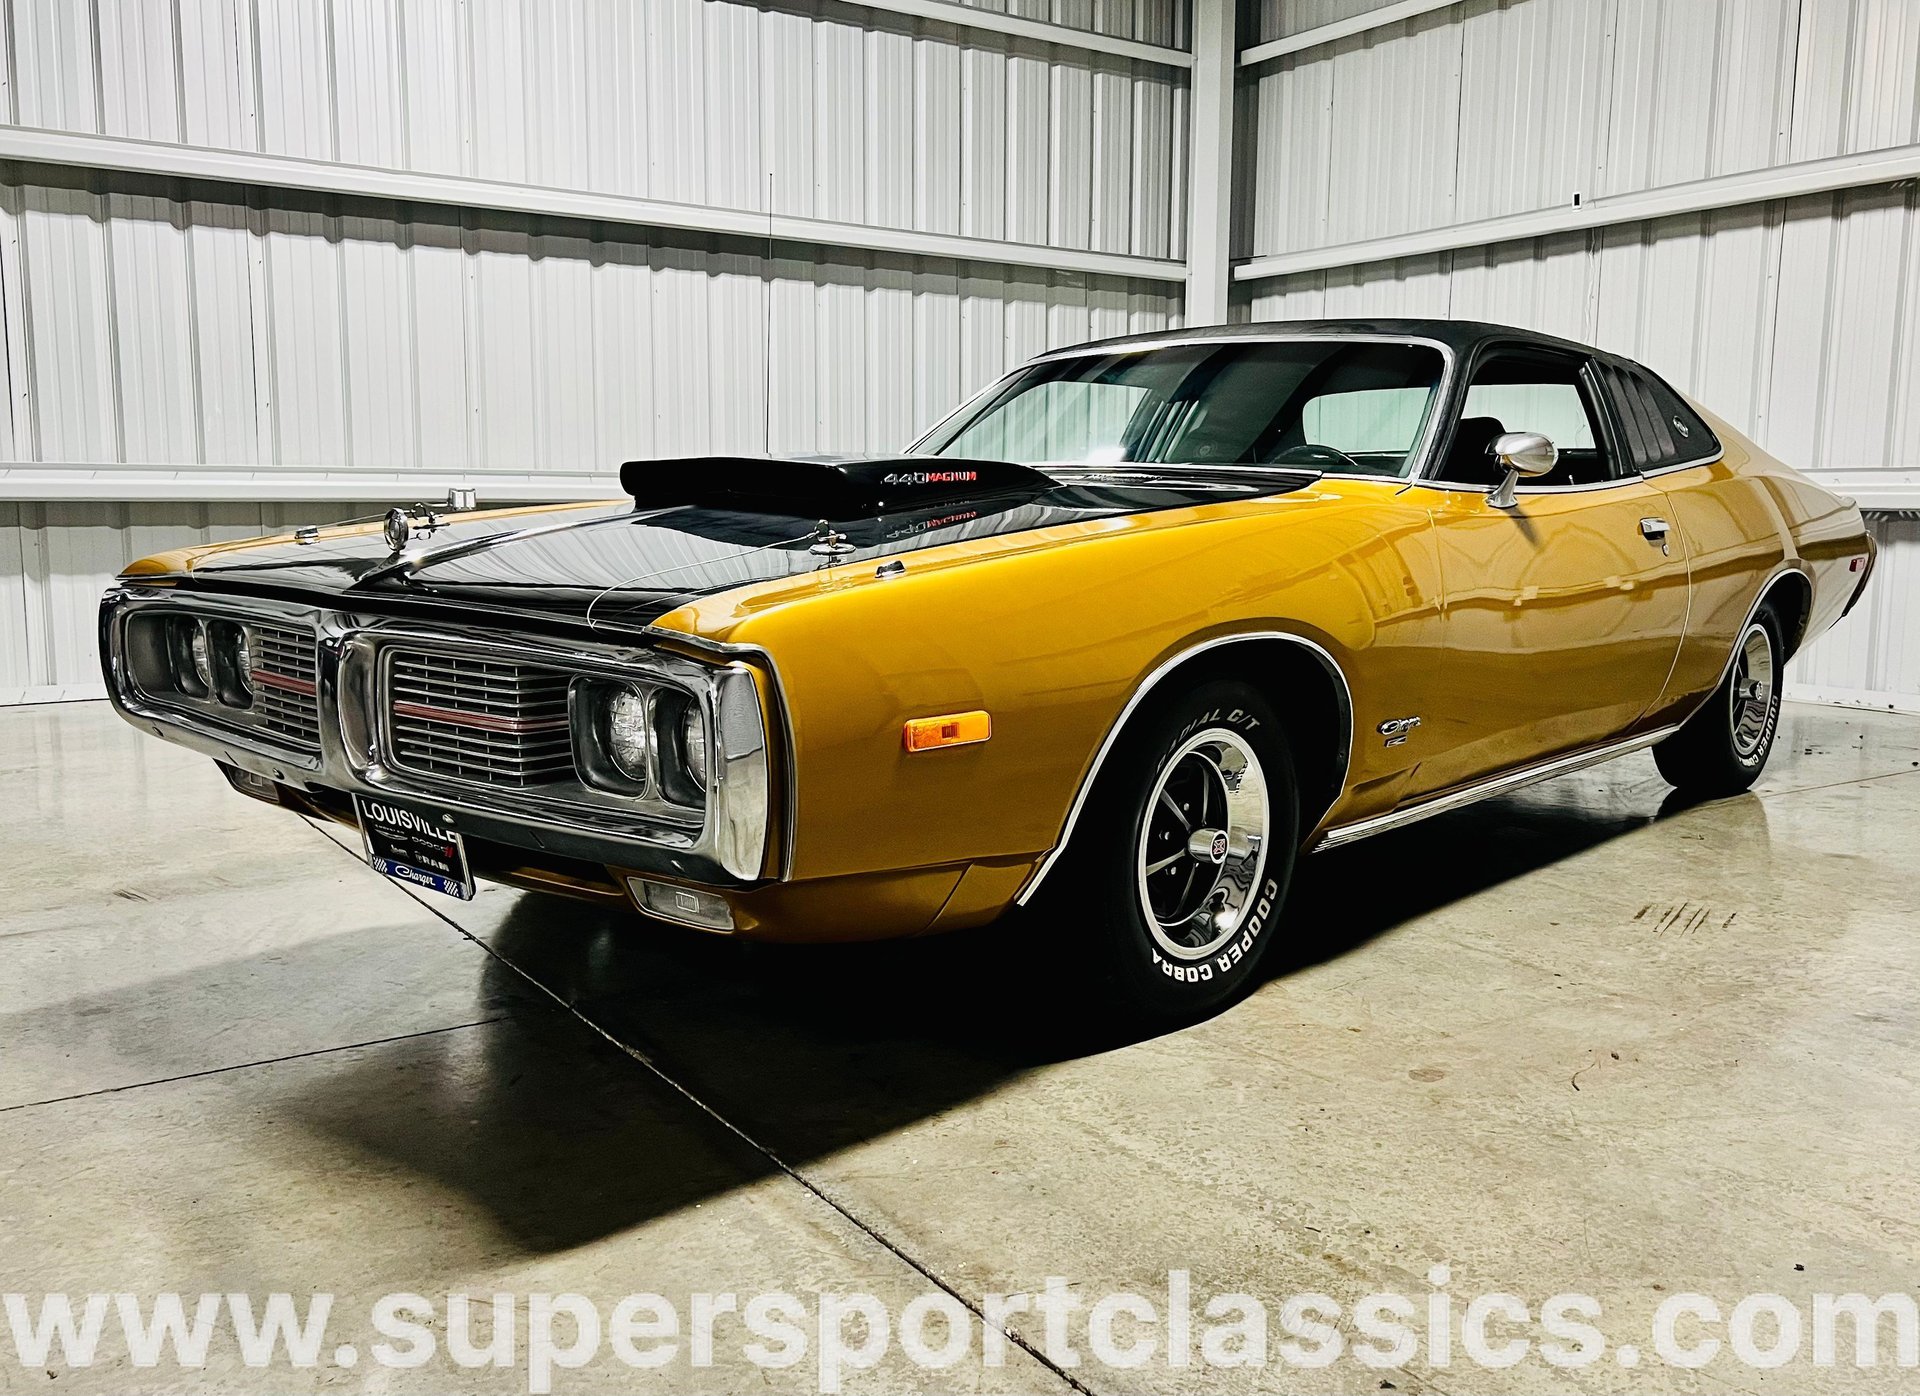 1973 Dodge Charger | SuperSport Classics